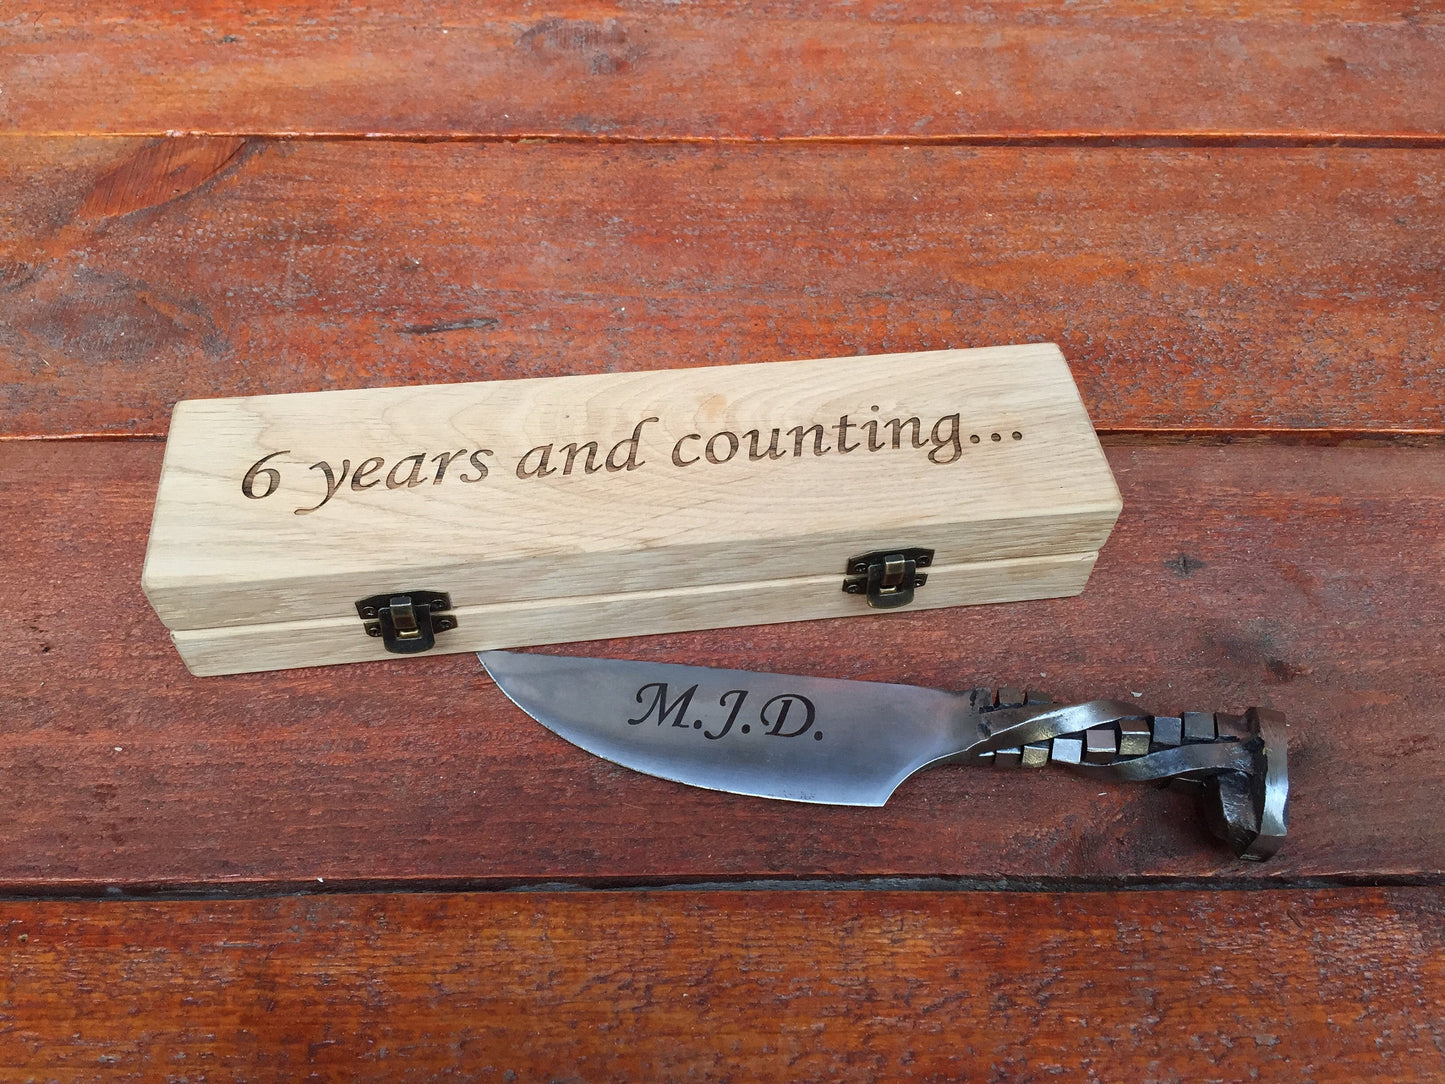 Railroad spike knife in engraved casket/wooden box, iron anniversary gift for him, 6 year anniversary gift for him, industrial art,iron gift